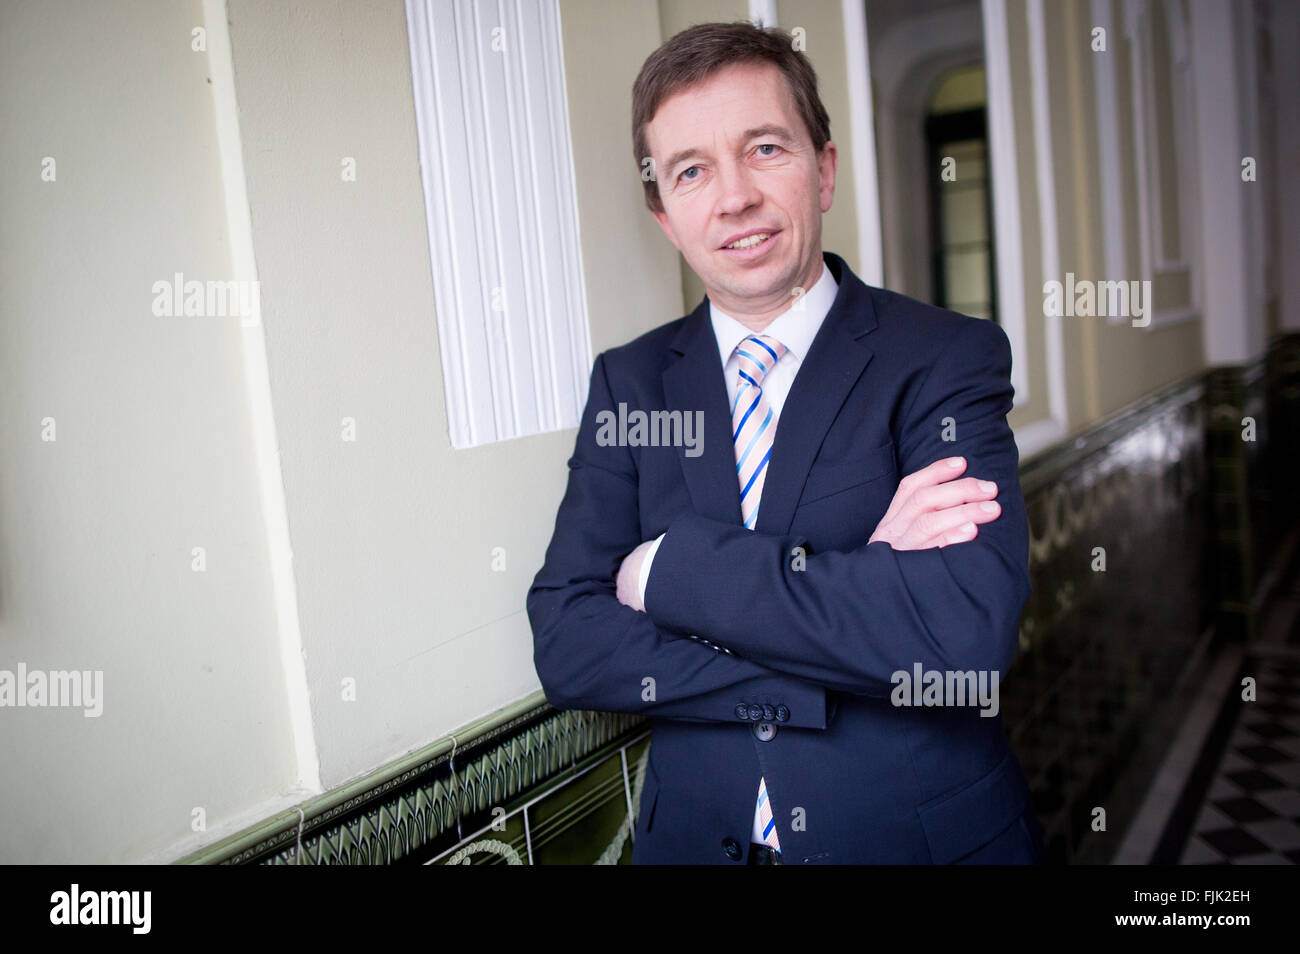 Bernd Lucke, party leader of Alfa - Allianz fuer Fortschritt und Aufbruch (lit. Alliance for Progress and Renewal) pictured after an interview with the German press agency, dpa, in Berlin, Germany, 26 February 2016. PHOTO: KAY NIETFELD/DPA Stock Photo